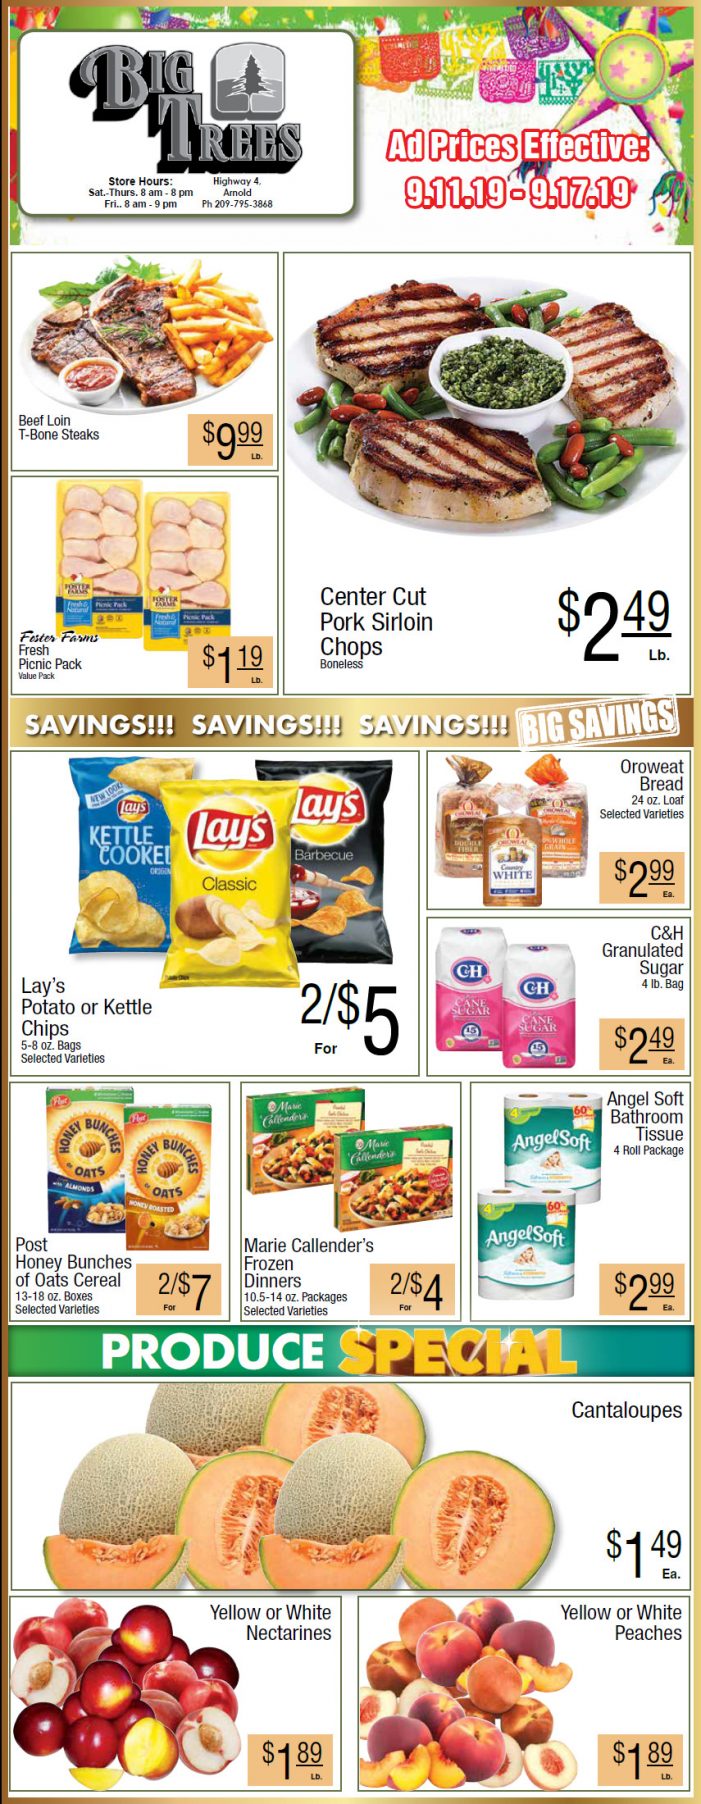 Big Trees Market Weekly Ad & Grocery Specials Through September 17th